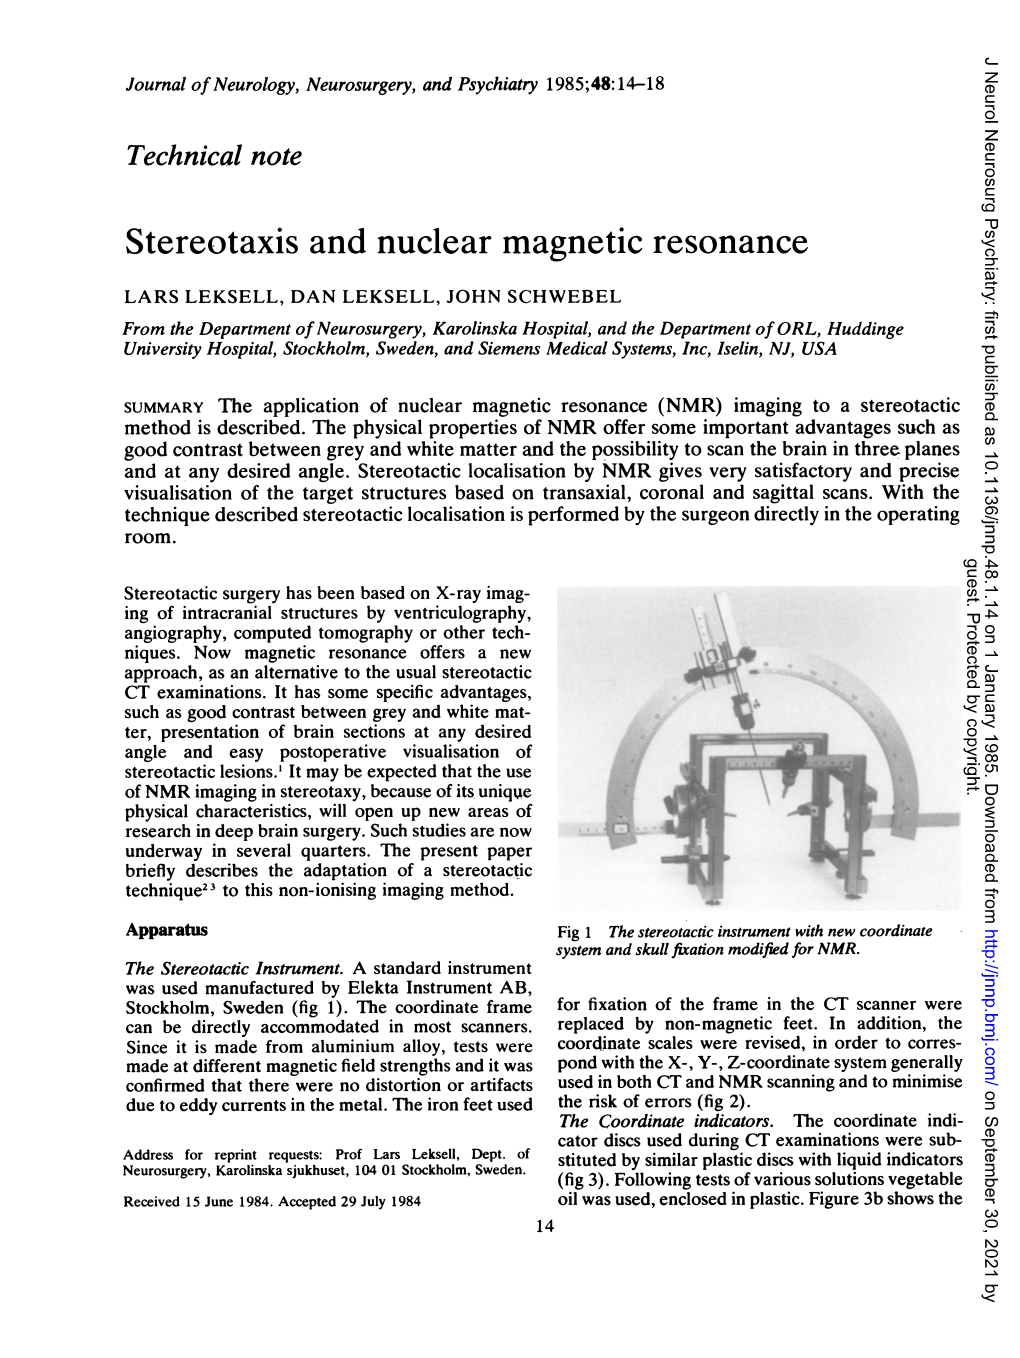 Stereotaxis and Nuclear Magnetic Resonance